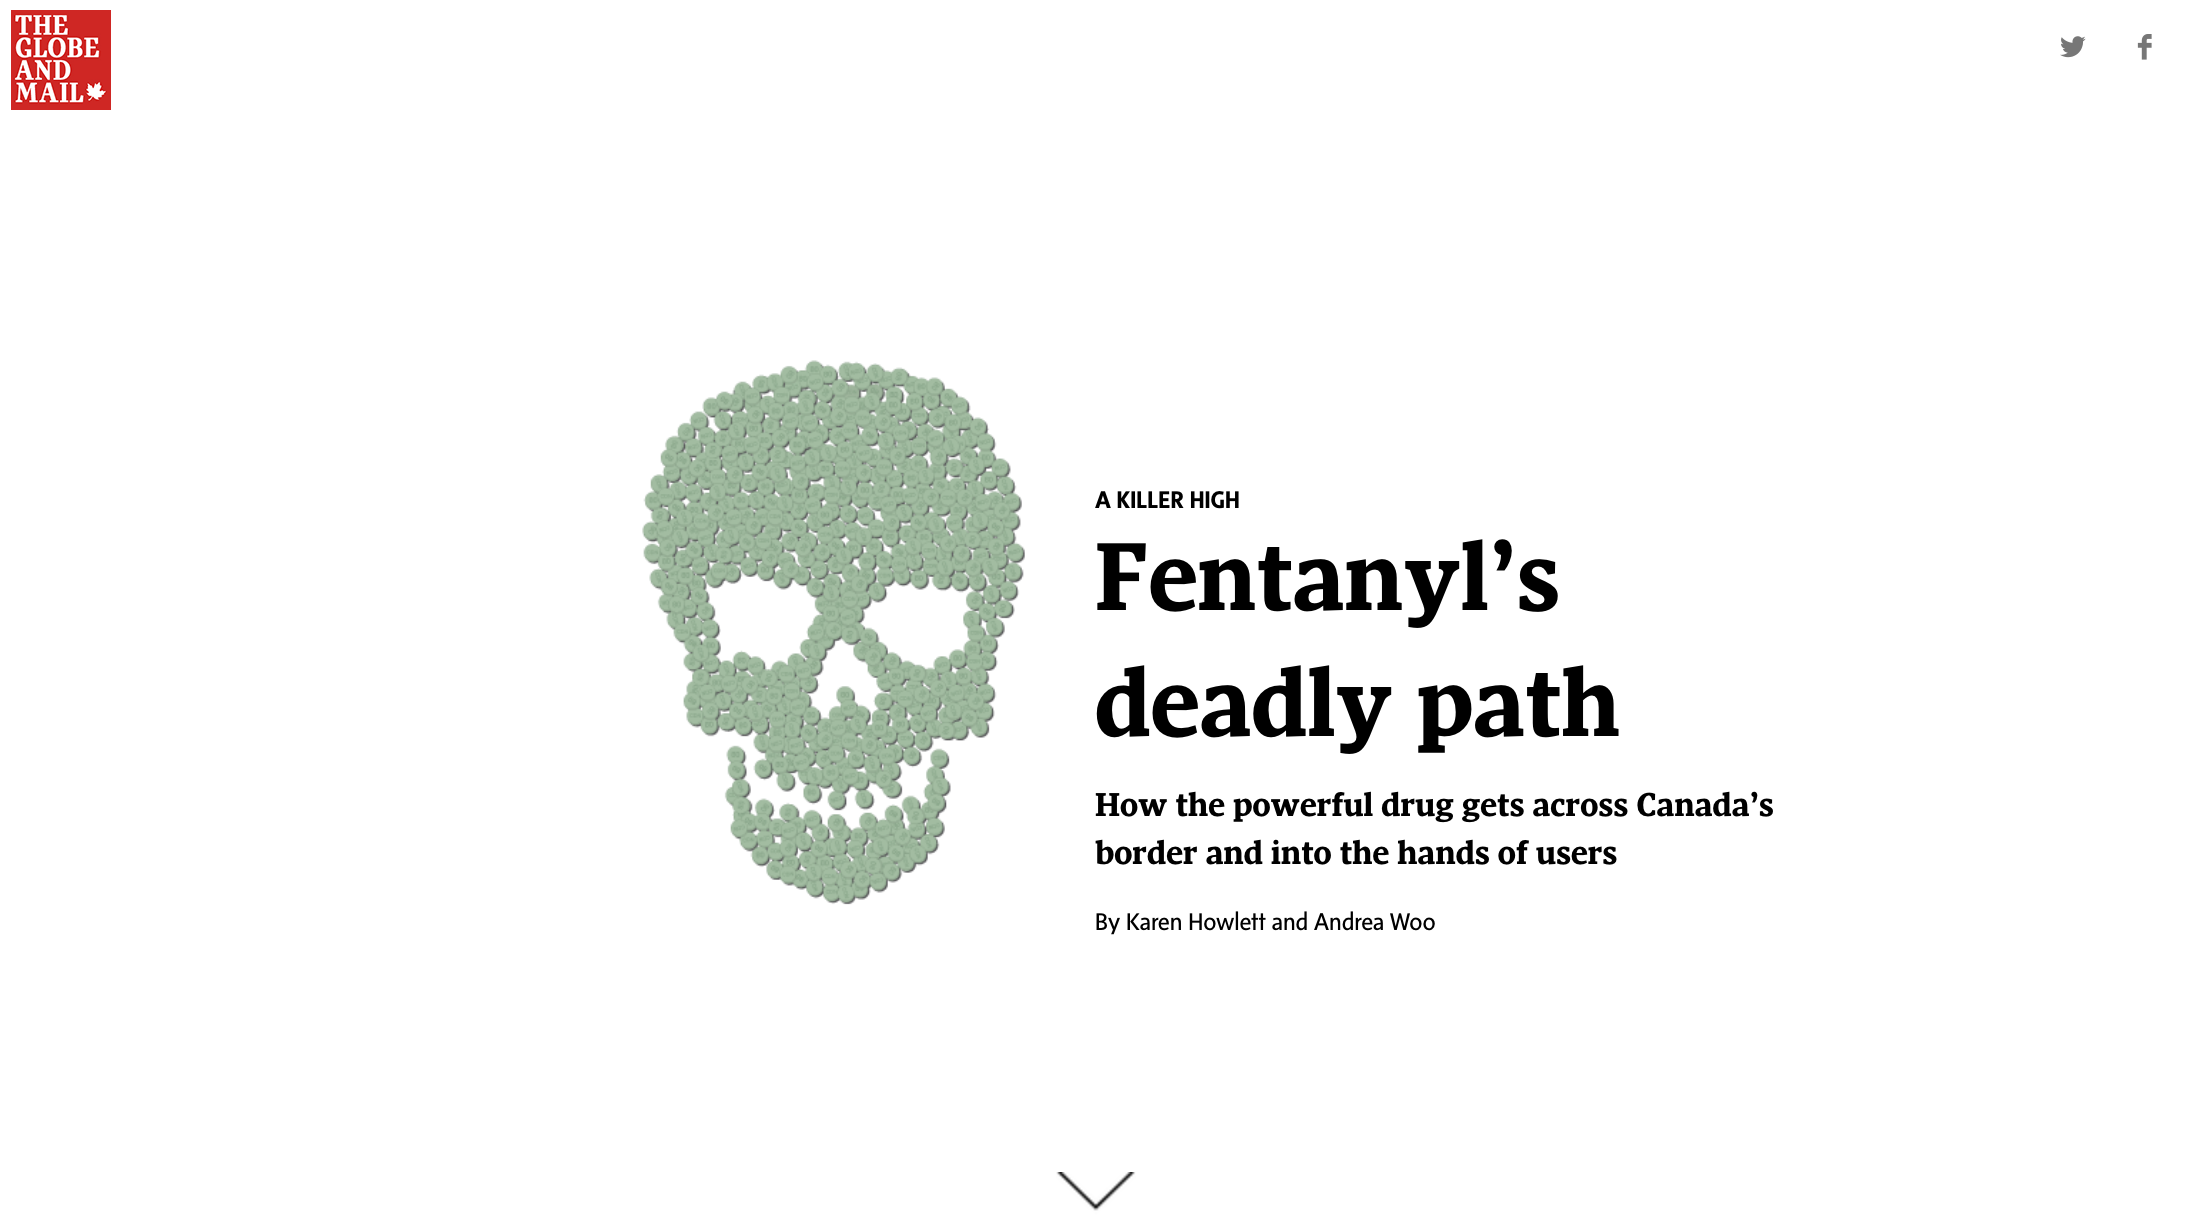 Thumbnail for: A KILLER HIGH: Fentanyl’s deadly path